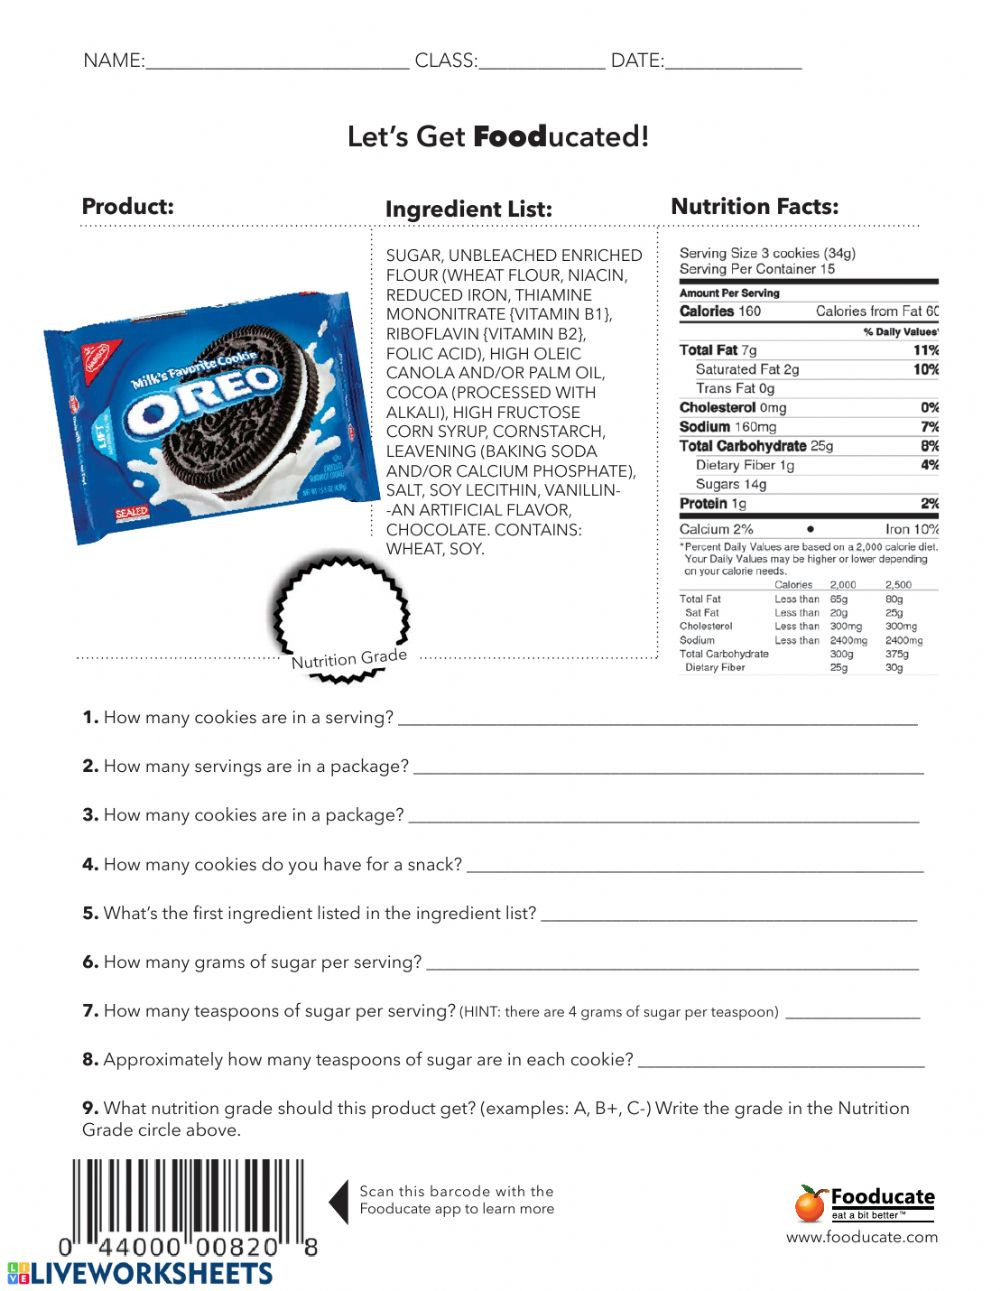 Nutrition Label Worksheet Answers Let S Get Fooducated oreos Interactive Worksheet